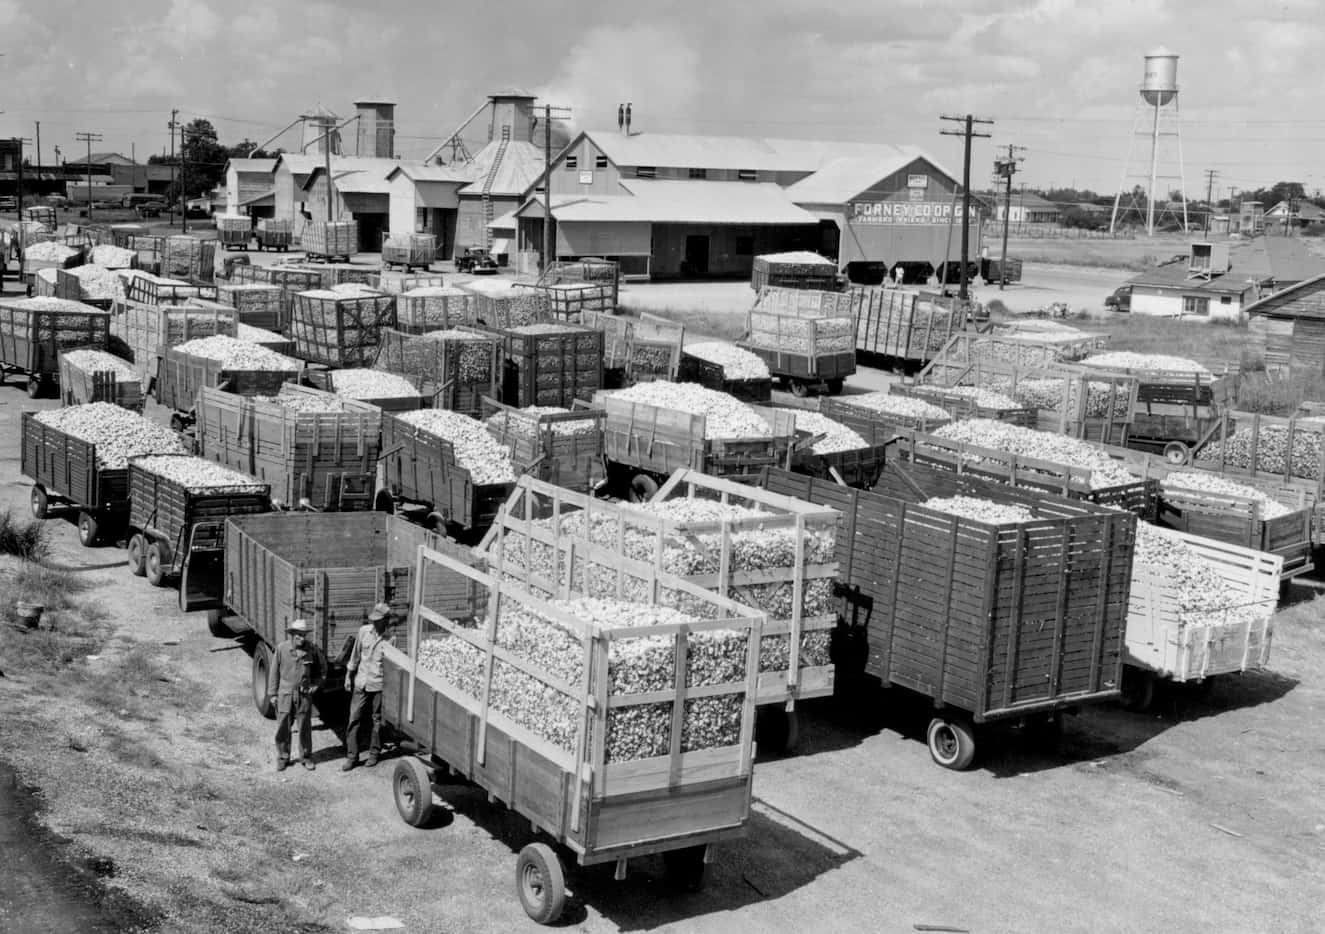 In 1958, farmers with trailers full of cotton line up outside the Forney Cotton Gin, which...